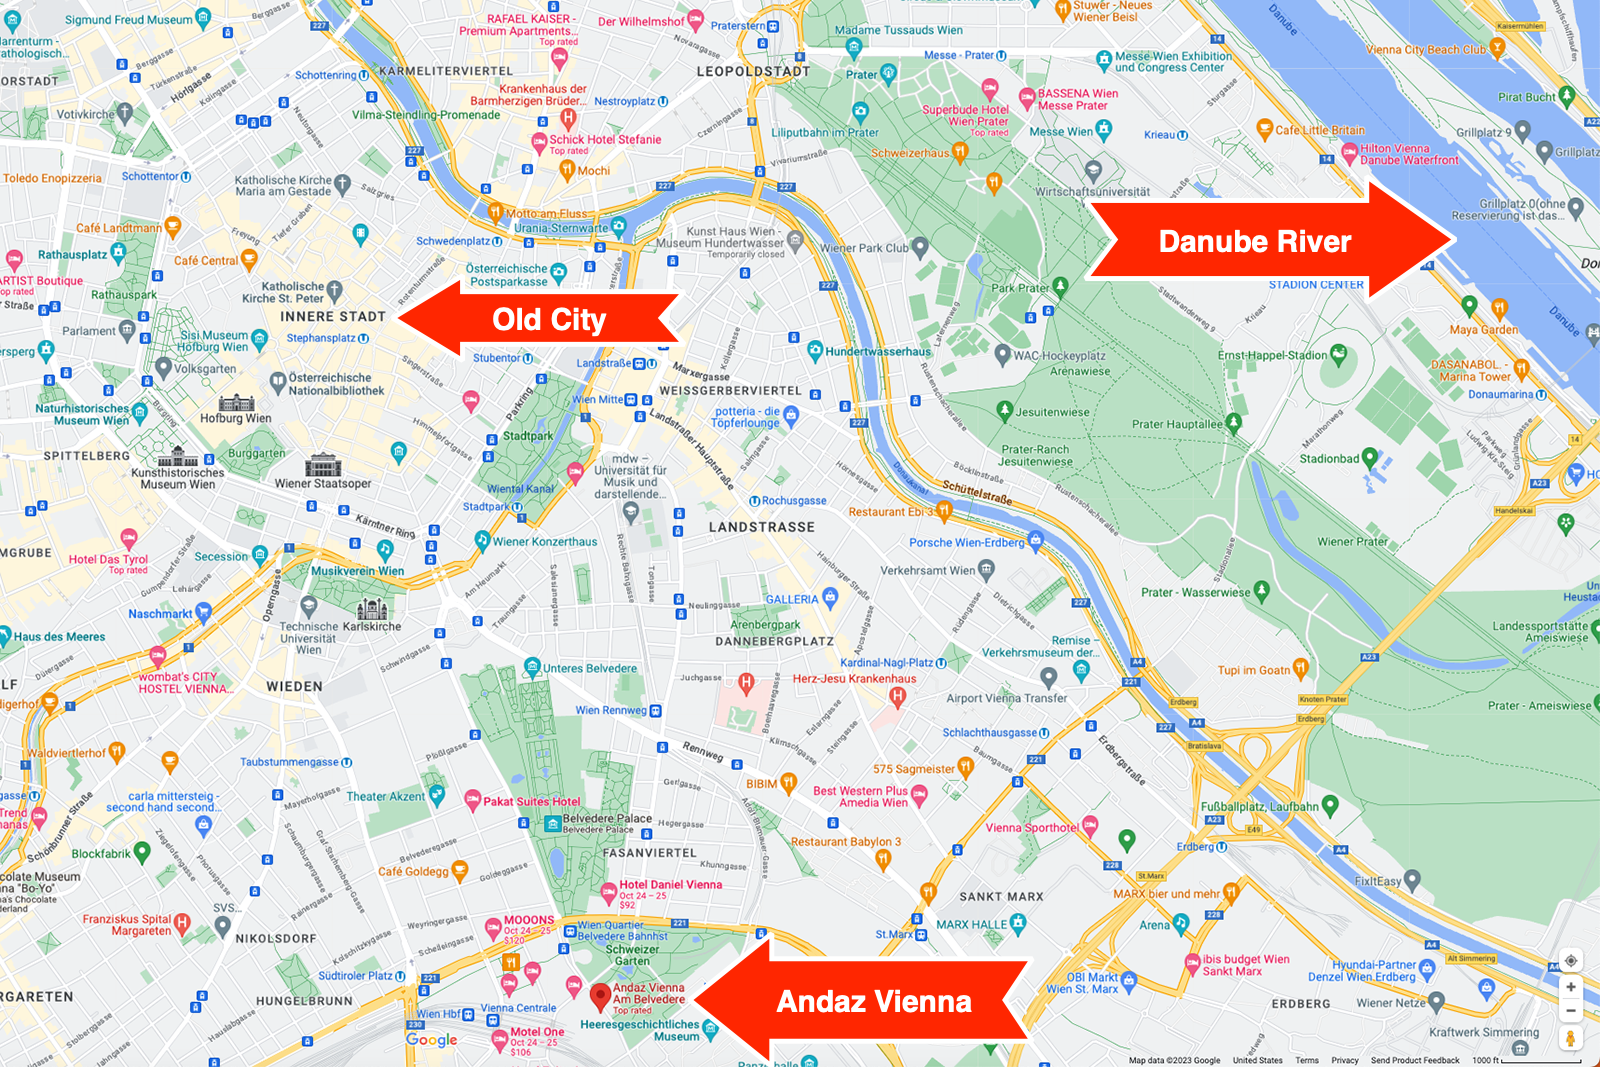 Map of Vienna showing the Andaz Vienna, Old City and the Danube River